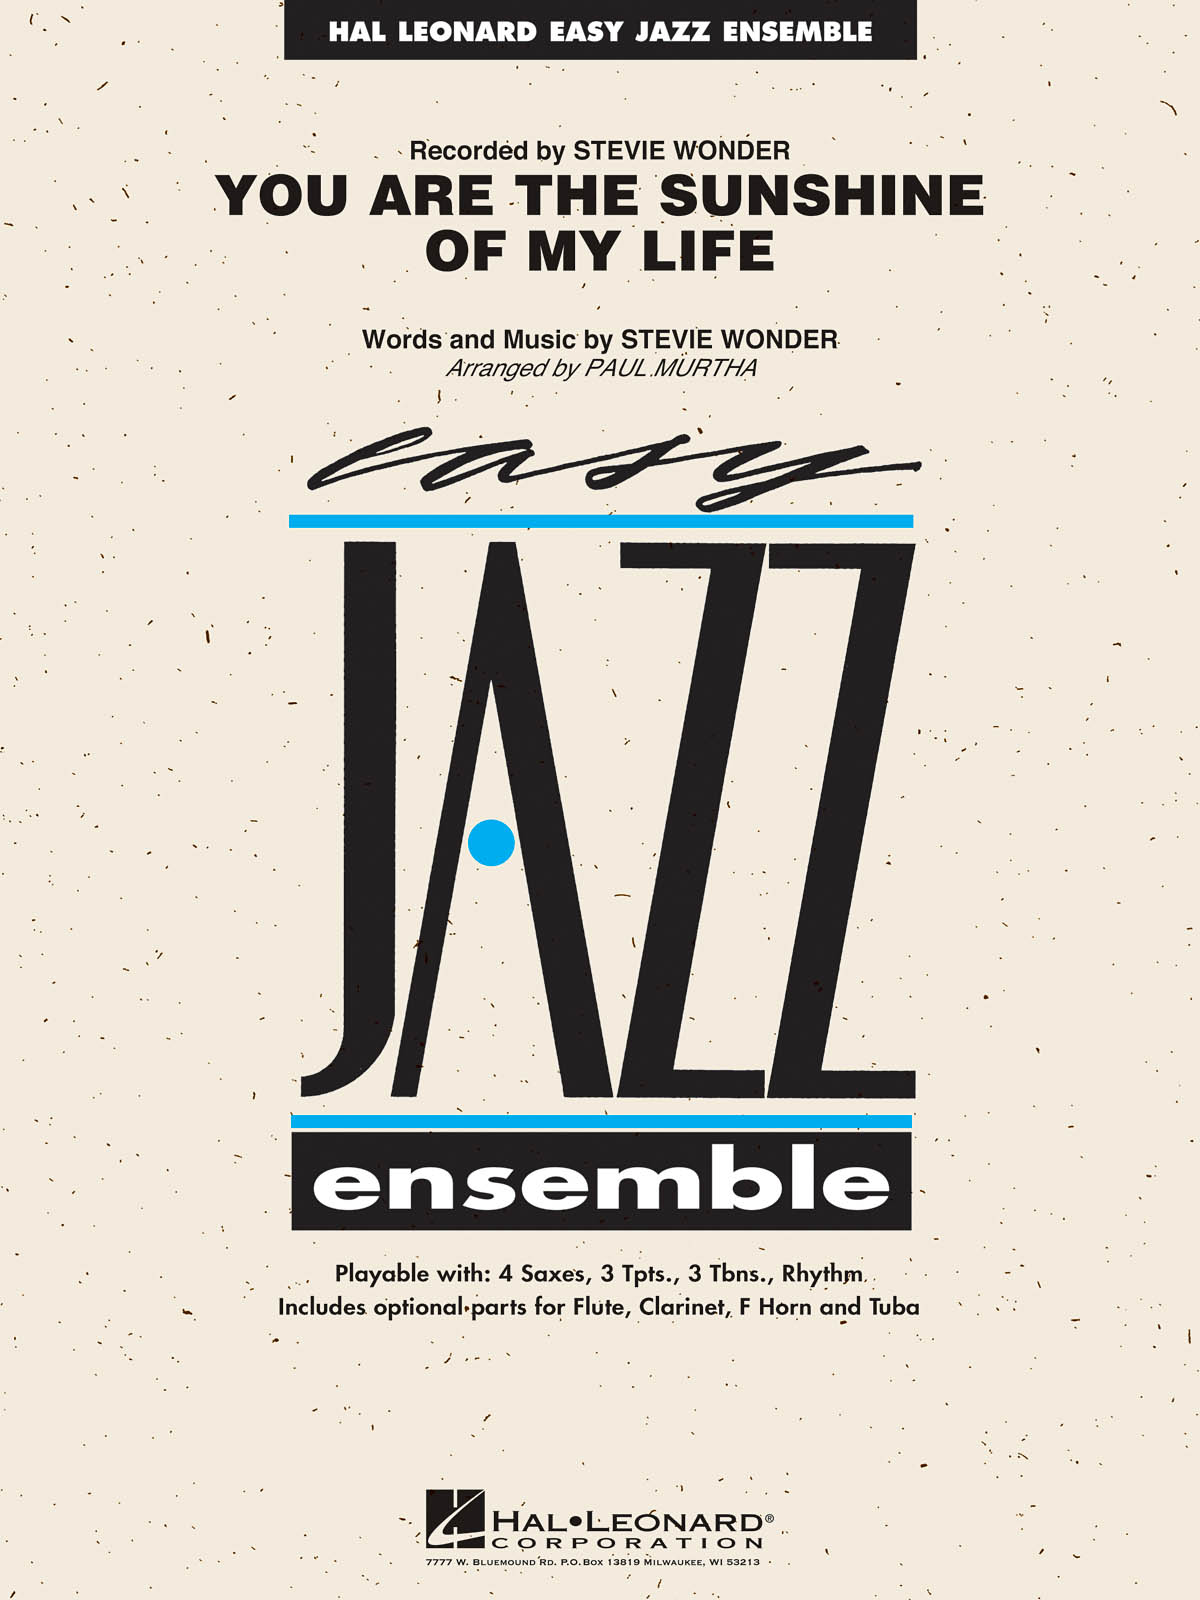 Stevie Wonder: You Are the Sunshine of My Life: Jazz Ensemble: Score and Parts